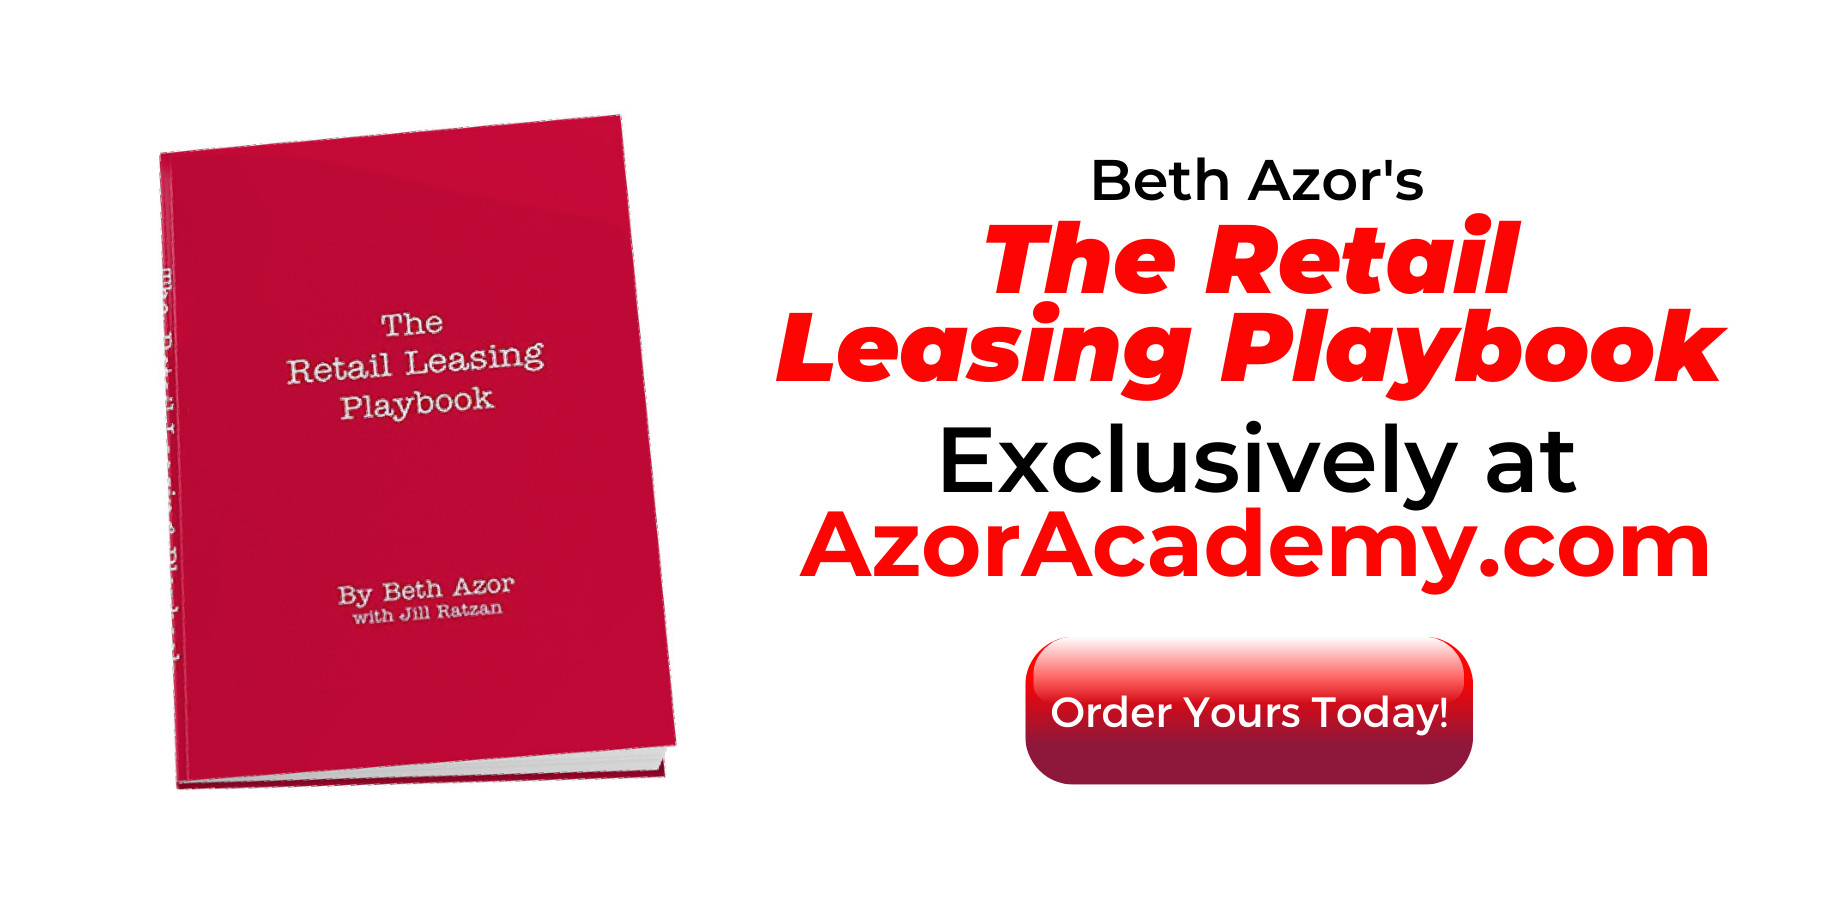 beth azor's The Retail Leasing Playbook